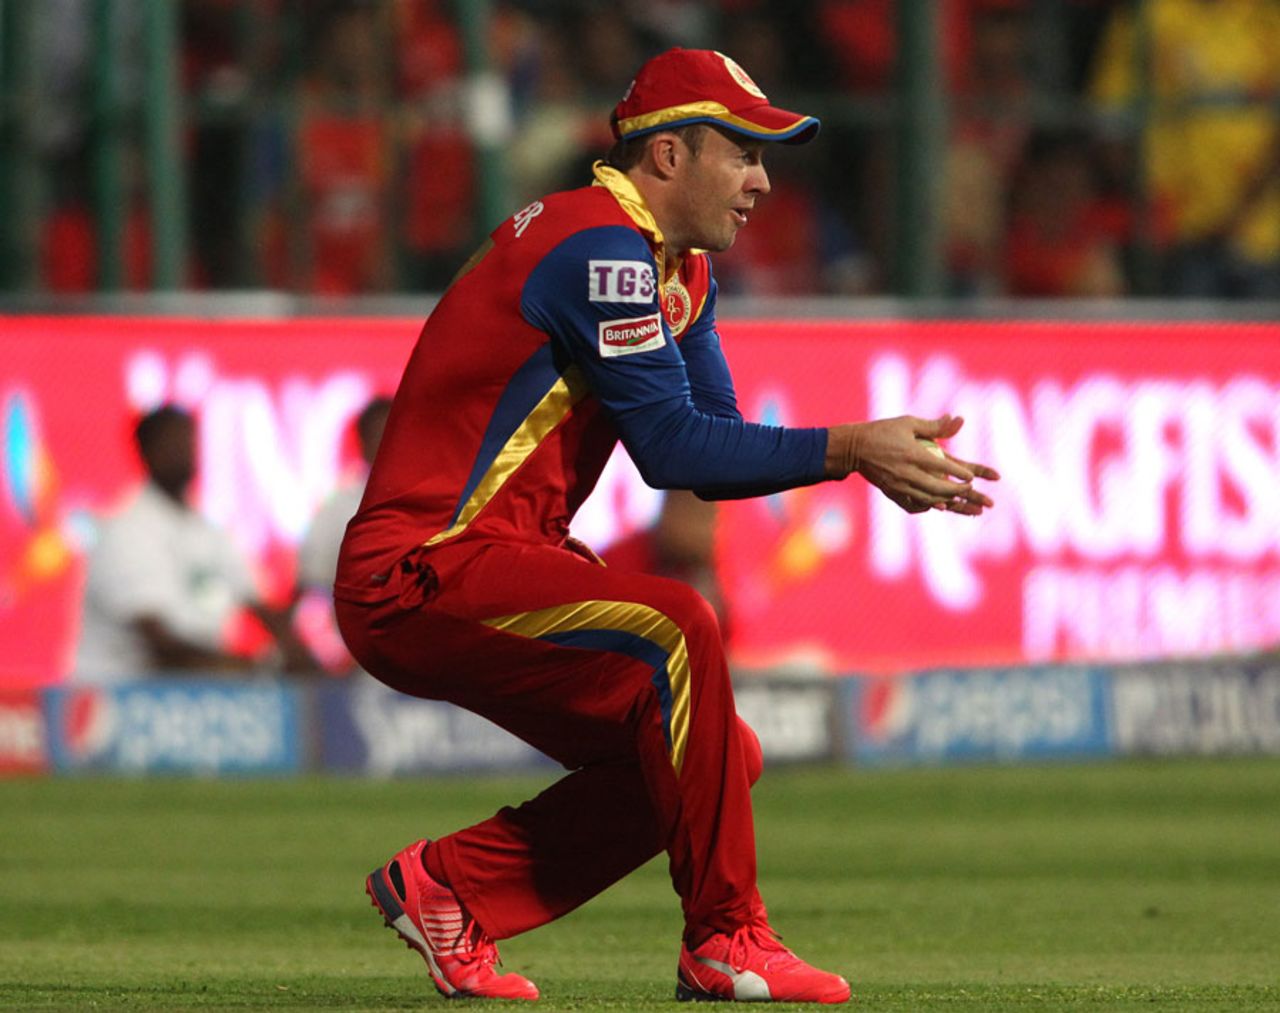 AB de Villiers holds on to a catch from MS Dhoni, Royal Challengers Bangalore v Chennai Super Kings, IPL 2015, Bangalore, April 22, 2015